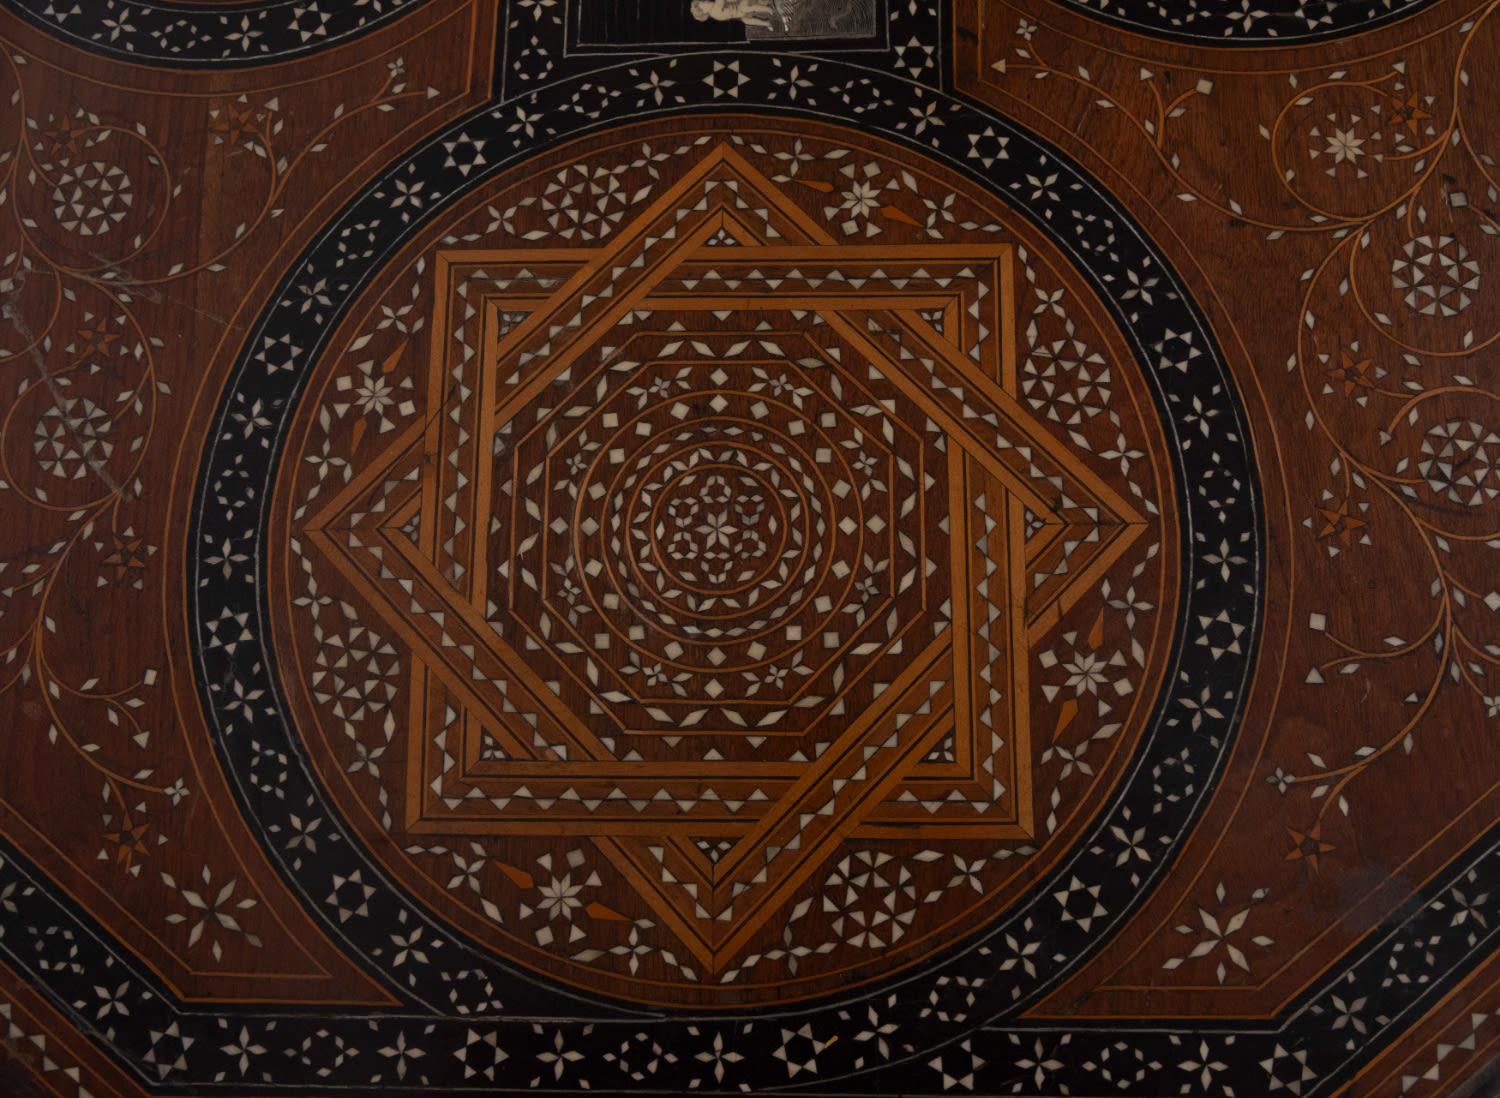 Beautiful table with drawer, made of copper, ebony and mother-of-pearl with bone inlays, 19th centur - Image 3 of 5